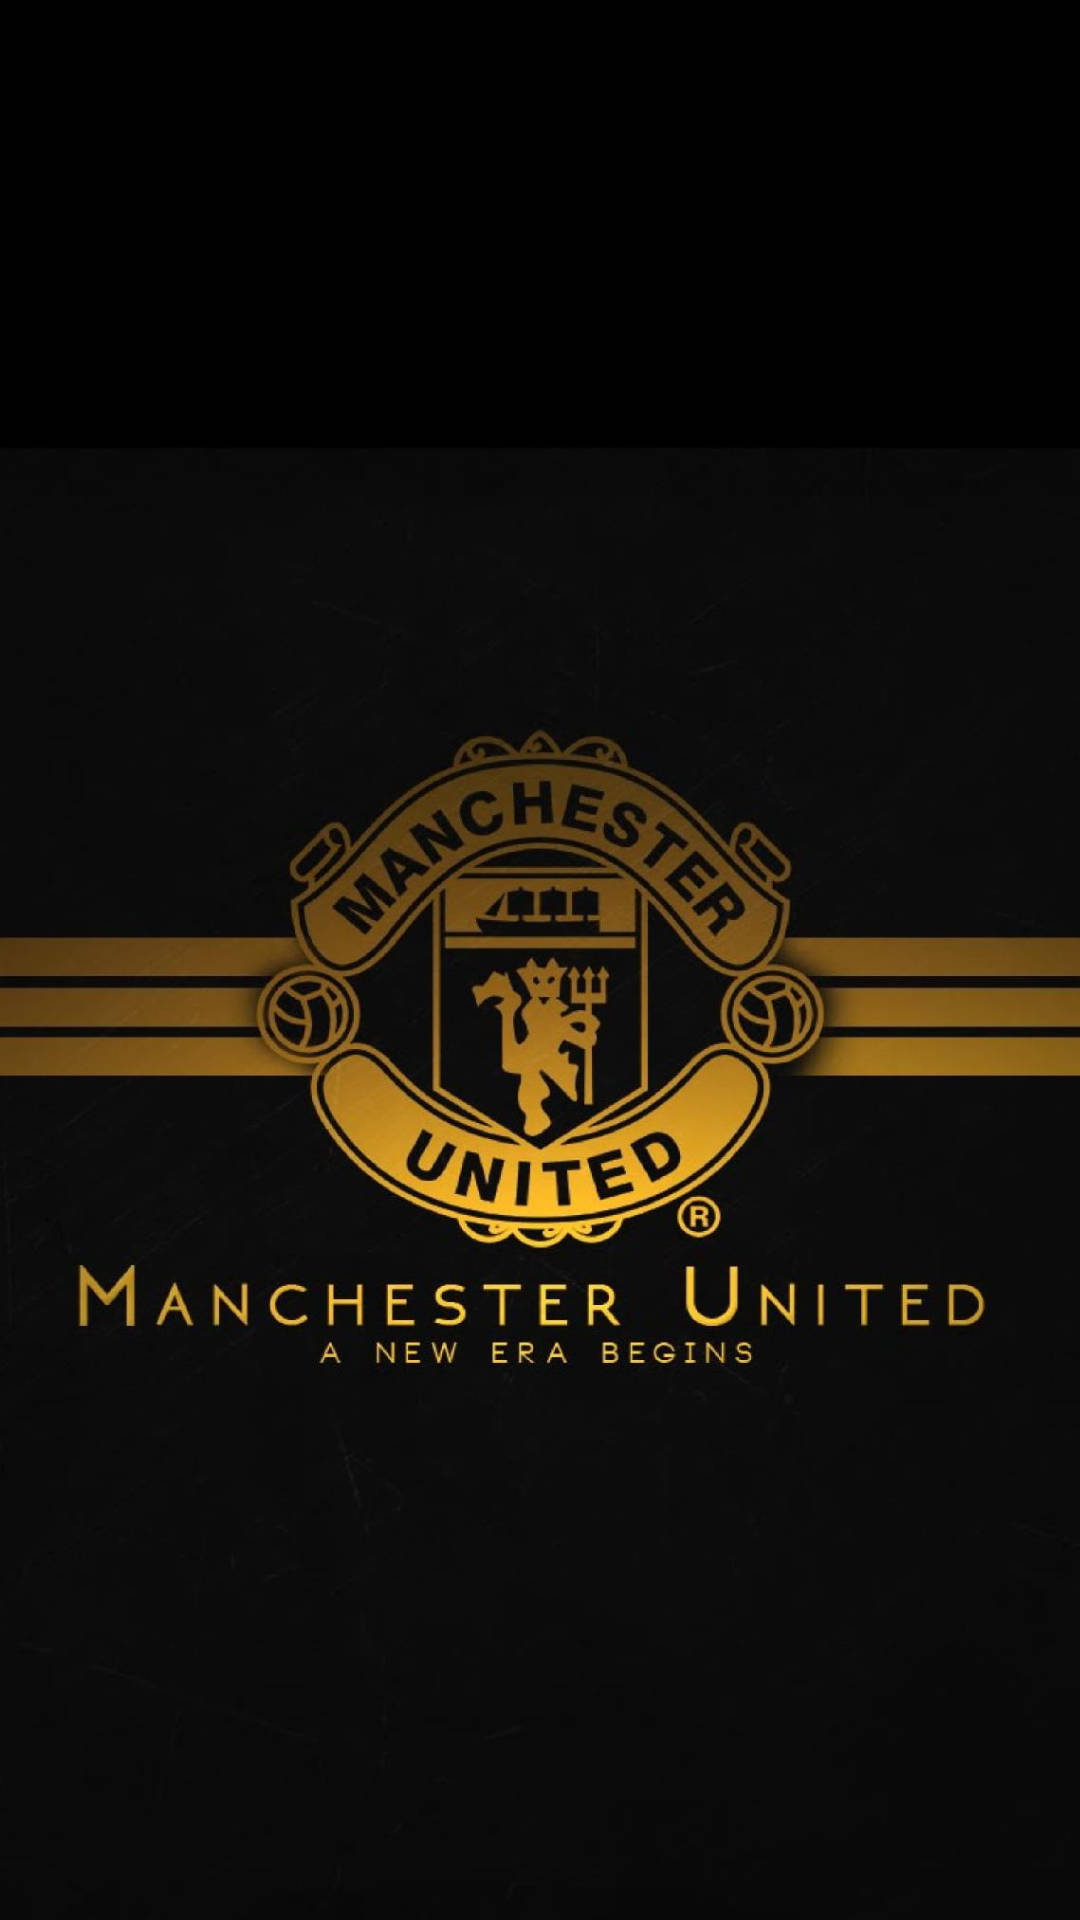 Free Manchester United Mobile Wallpaper Downloads, [100+] Manchester United  Mobile Wallpapers for FREE 